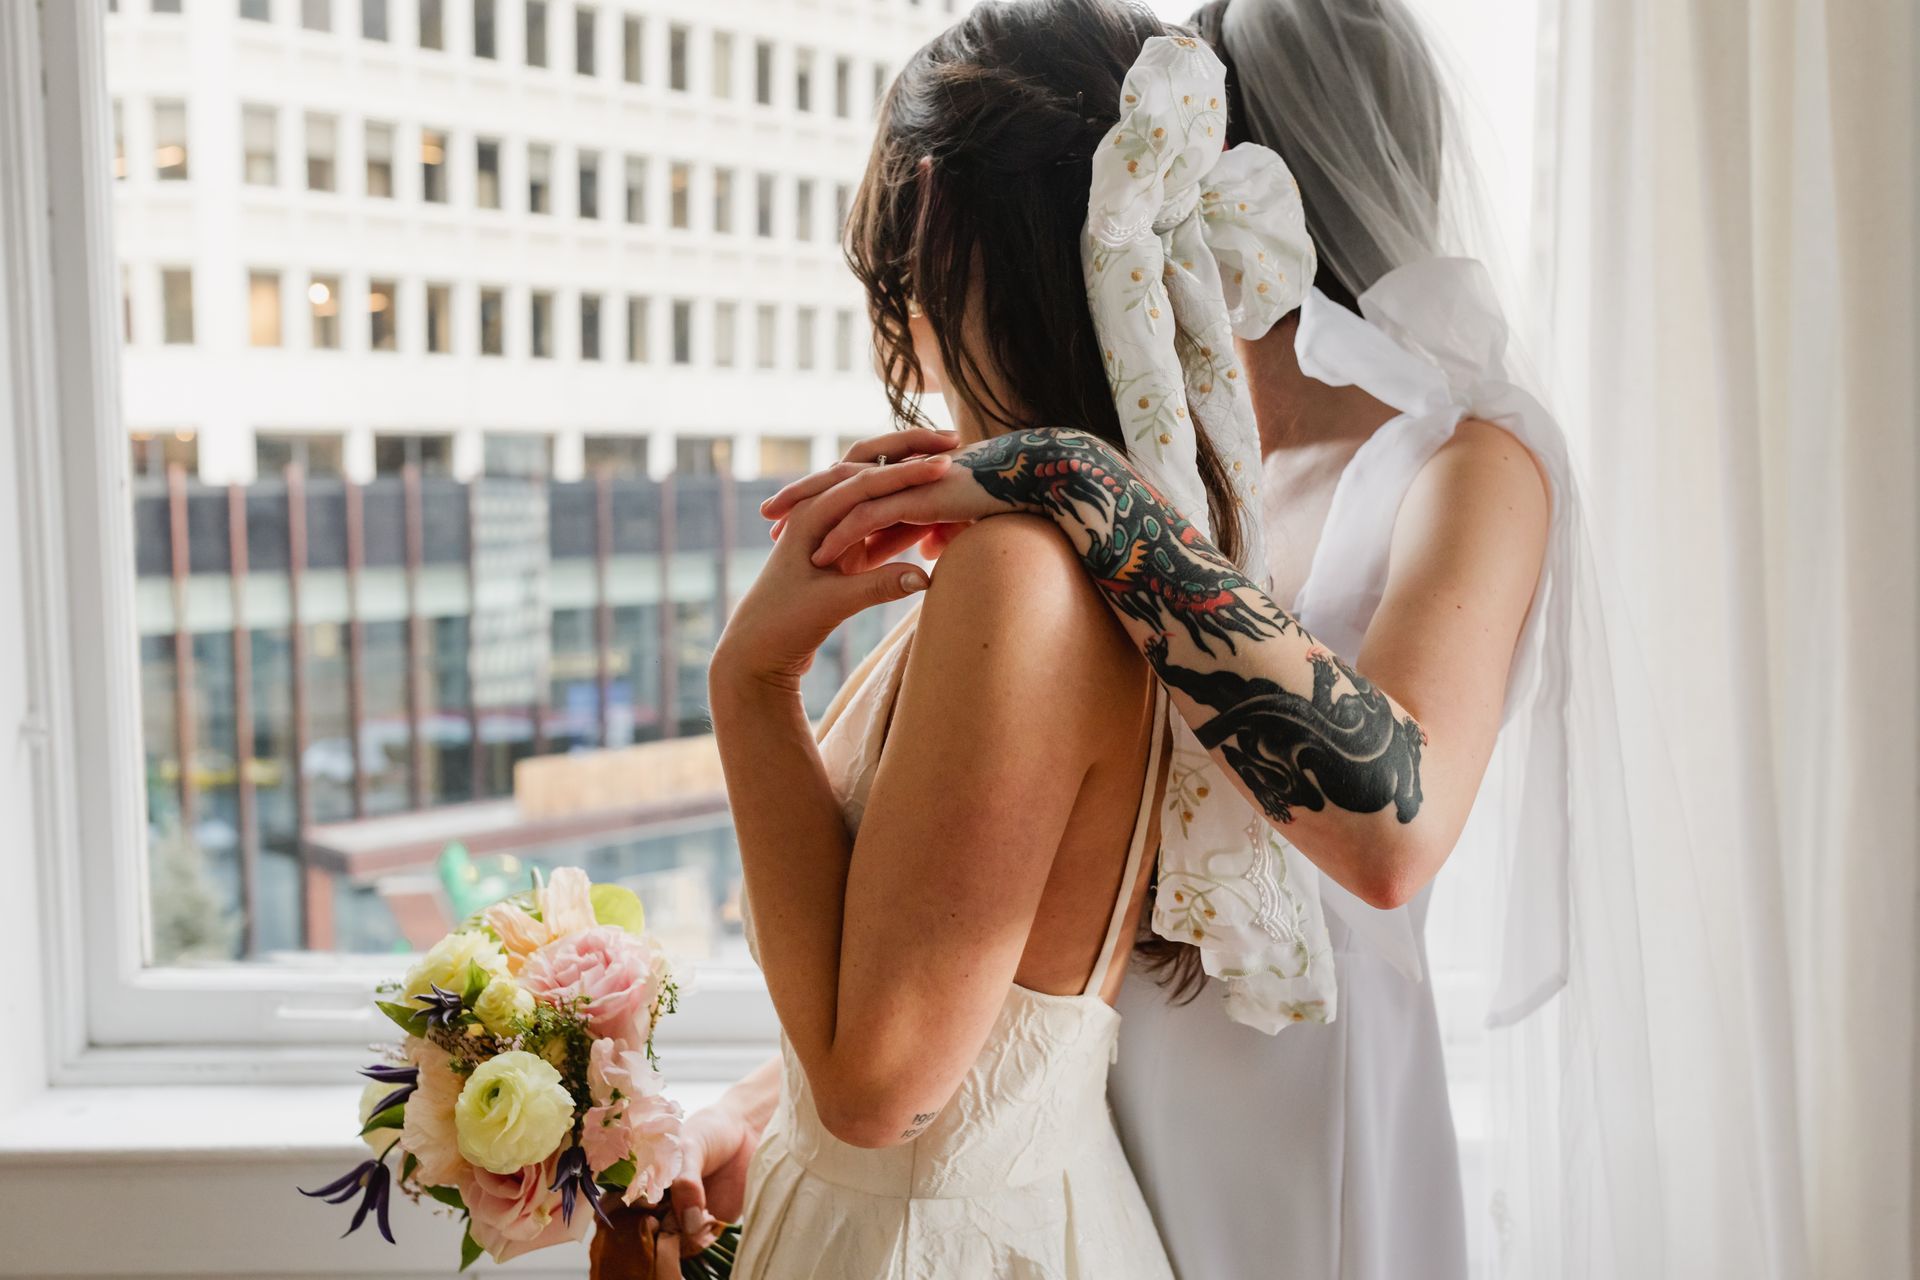 two brides looking out of the window, one has a bow in their hair and the other has bows on their dress